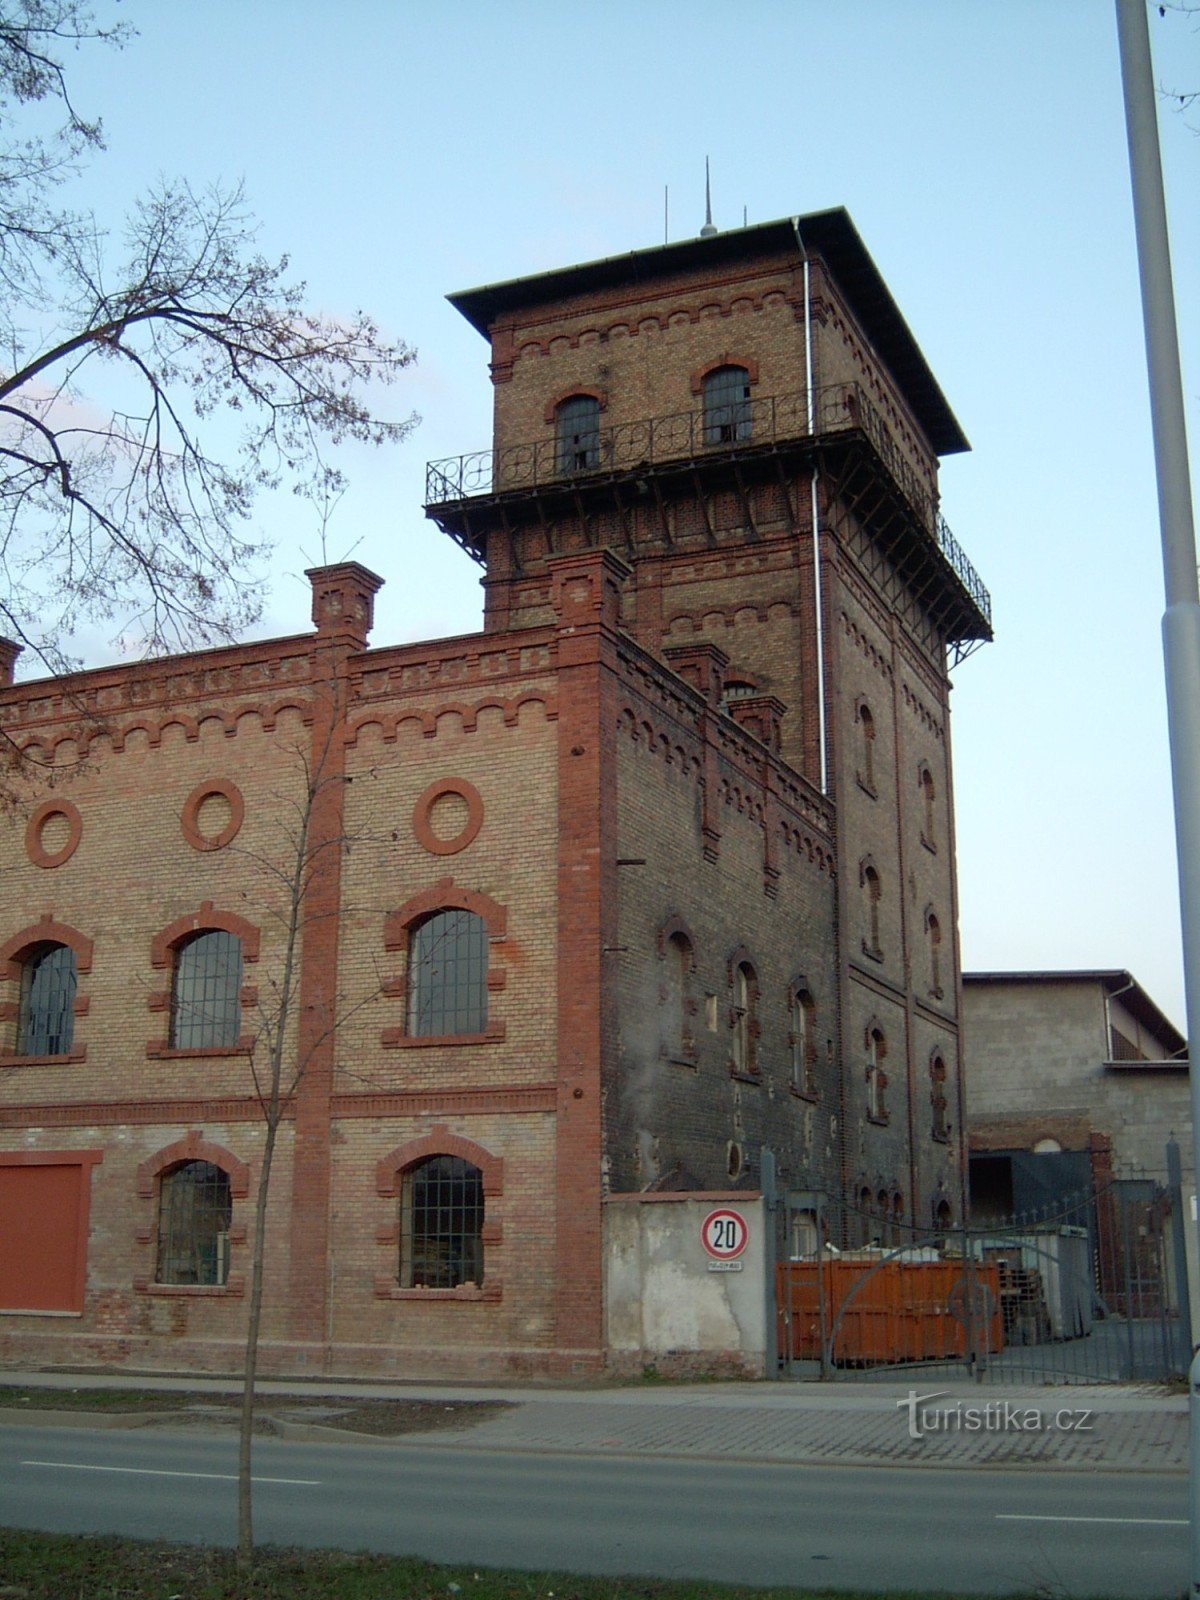 view of the slaughterhouse from Masná street